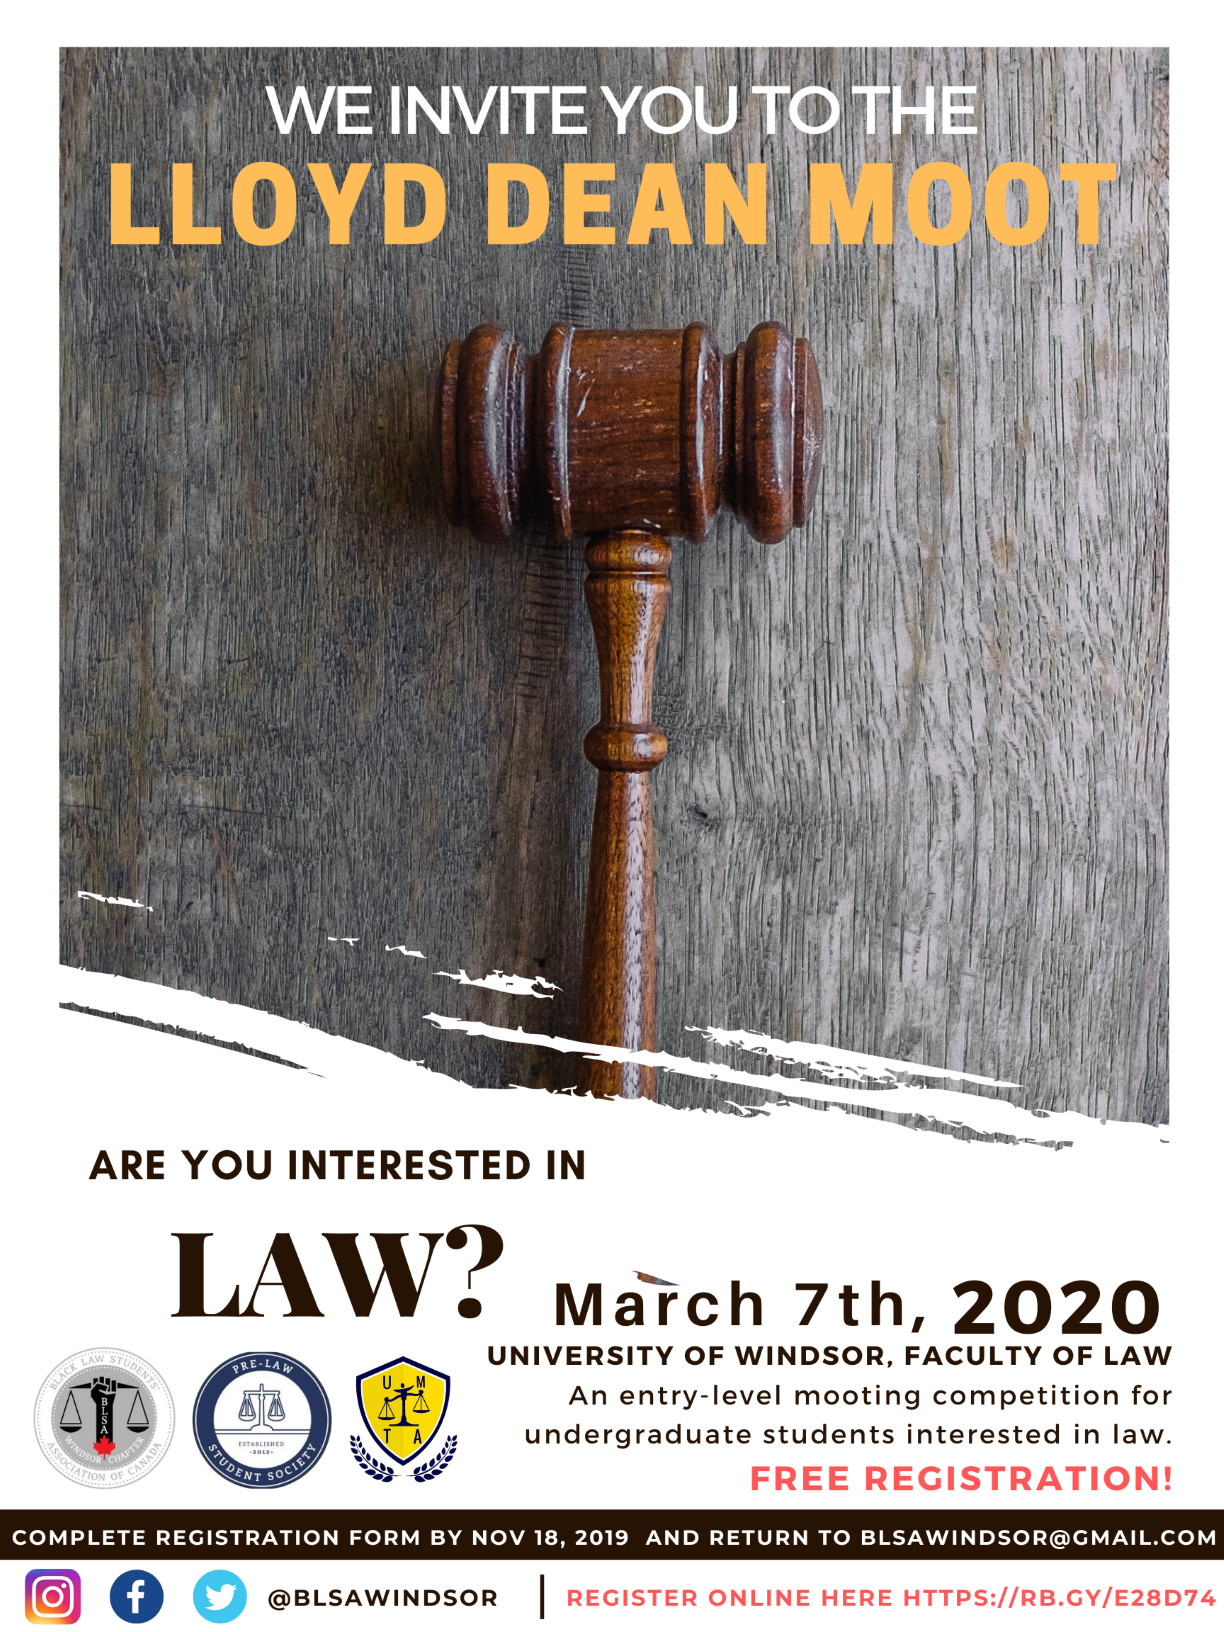 LLoyd Dean Moot Competition poster